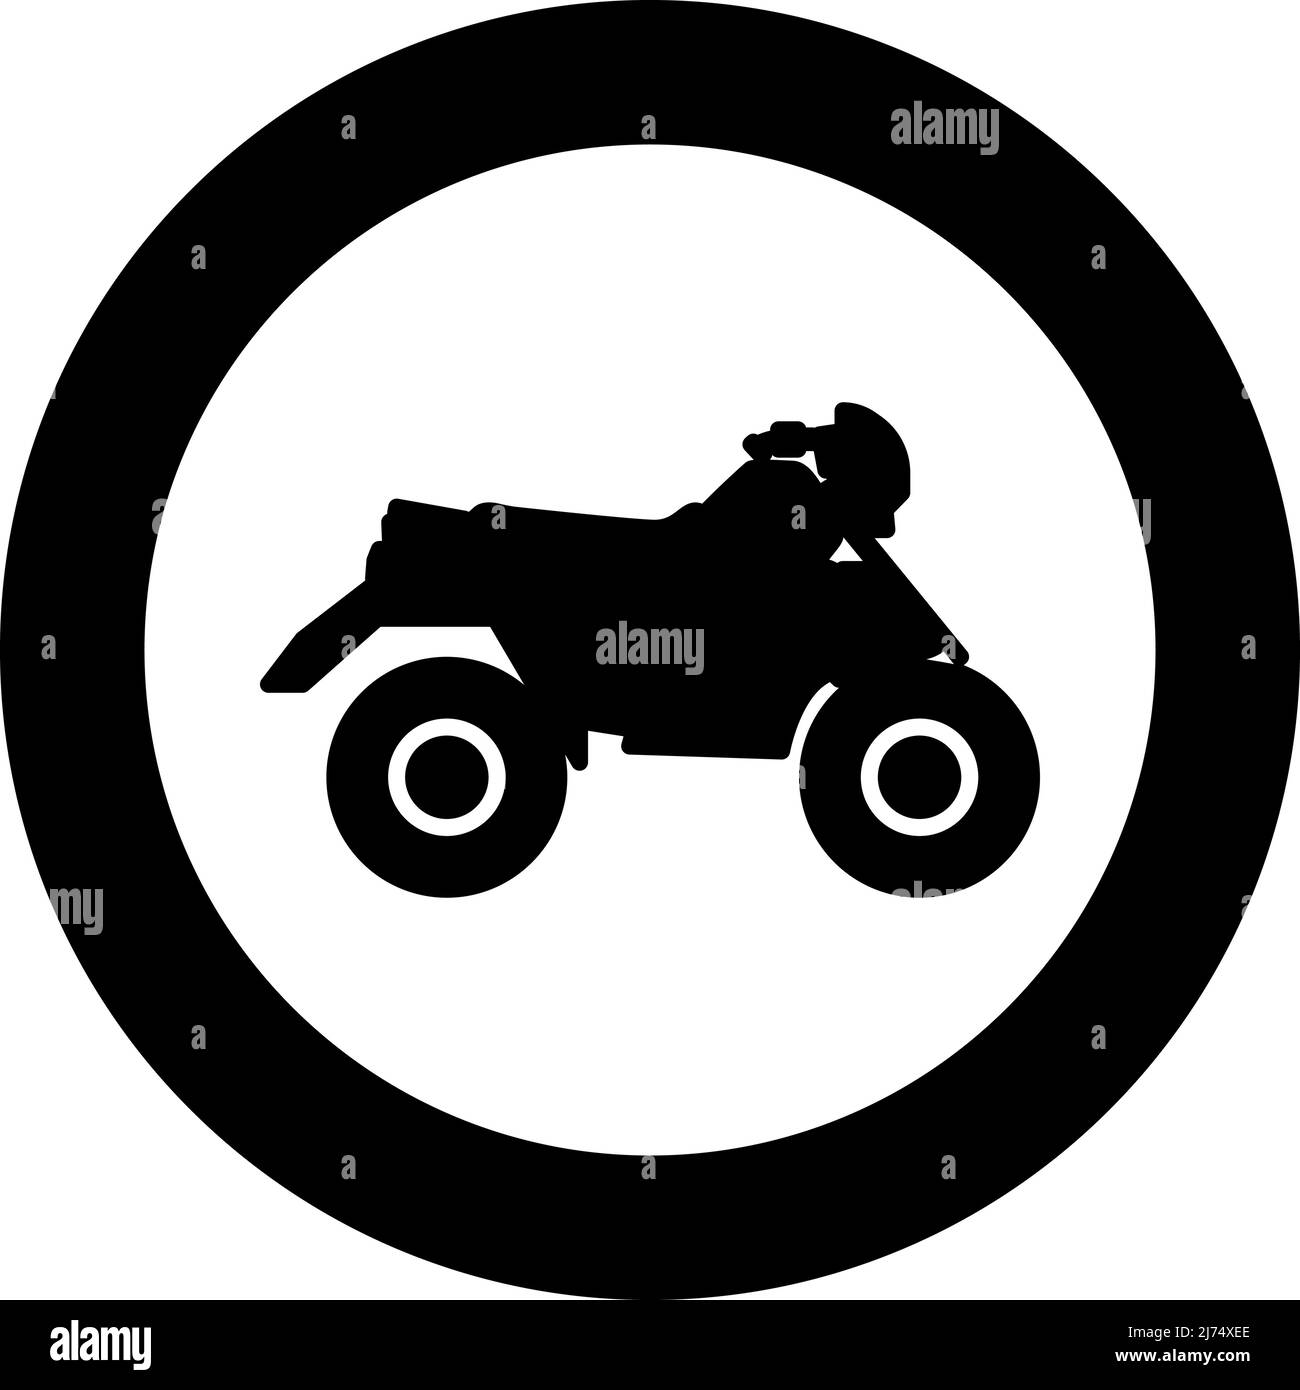 Quad bike ATV moto for ride racing all terrain vehicle icon in circle round black color vector illustration image solid outline style simple Stock Vector